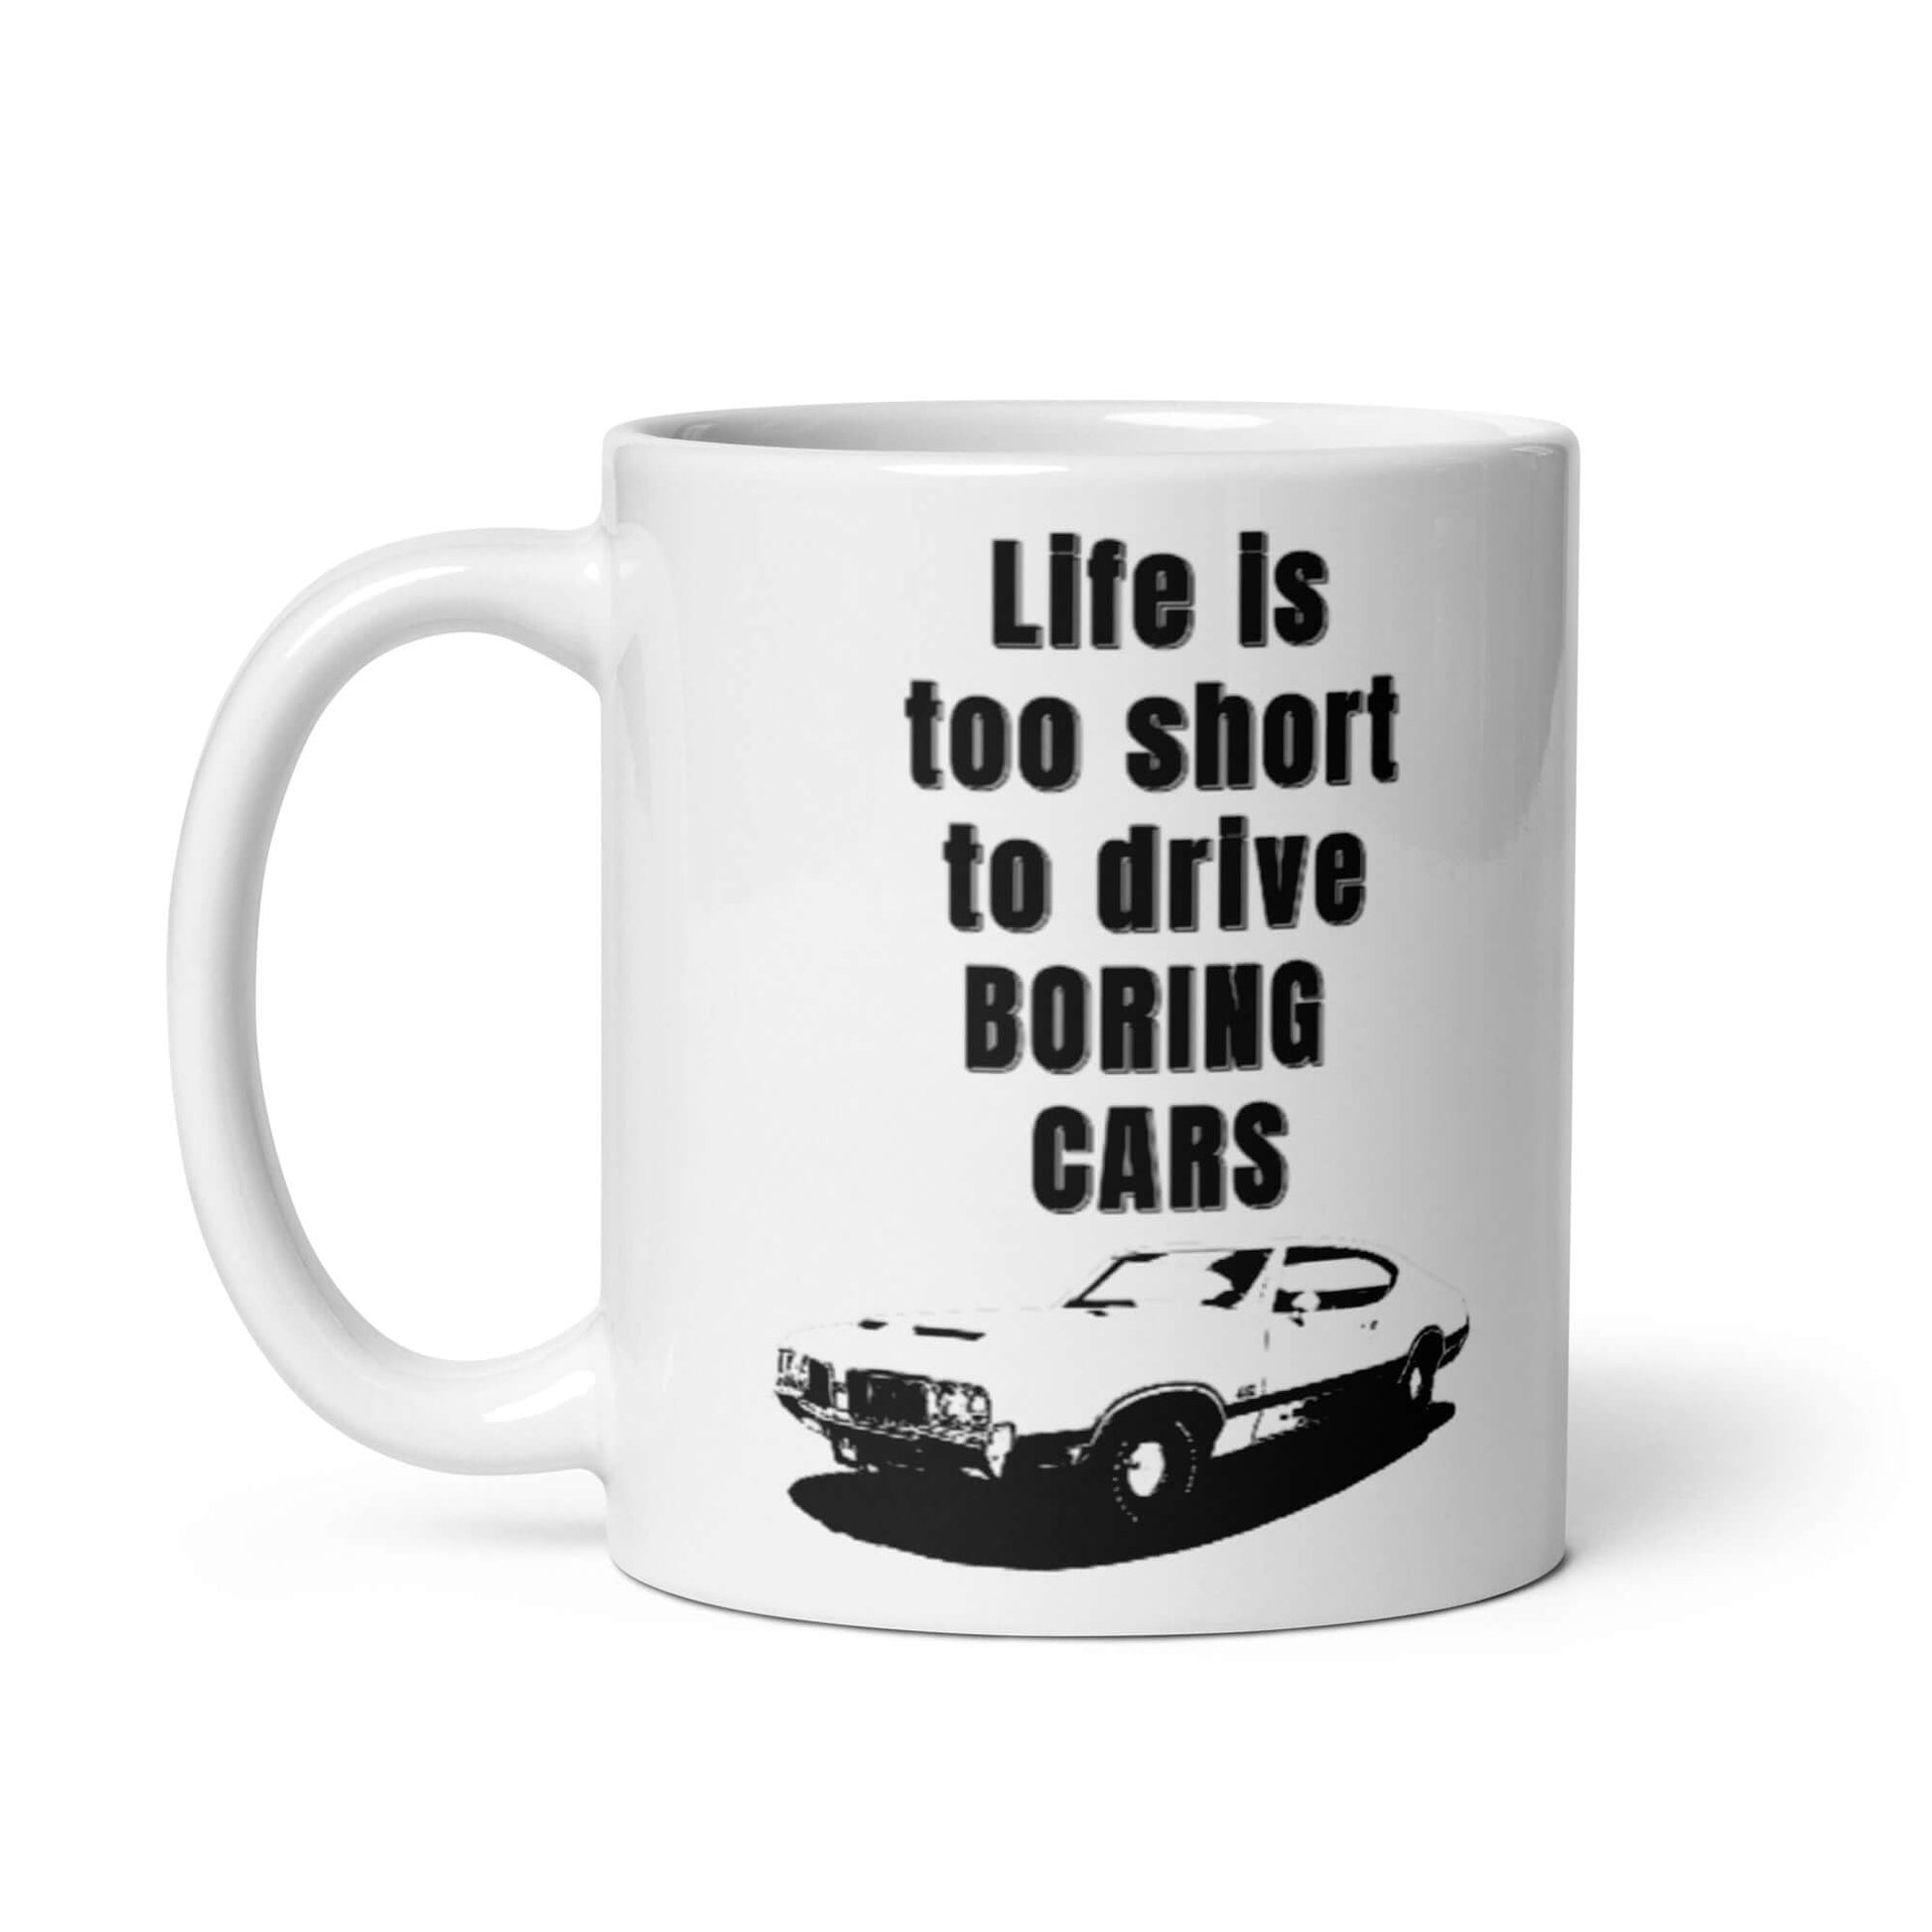 Life is too short to be driving boring cars - 1970 Oldsmobile 442 - White glossy mug 1970 olds 1970 oldsmobile 442 Caffeine chevrolet chevy classic car Coffee Addiction Coffee Beans Coffee Break Coffee Humor Coffee is Life Coffee Lover Coffee Shop Coffee Snob Coffee Time Espresso Funny Quotes Humor Java Keep Calm and Drink Coffee Latte Mocha Morning muscle car olds 442 oldsmobile oldsmobile 442 Procaffeinating Sarcasm Wordplay